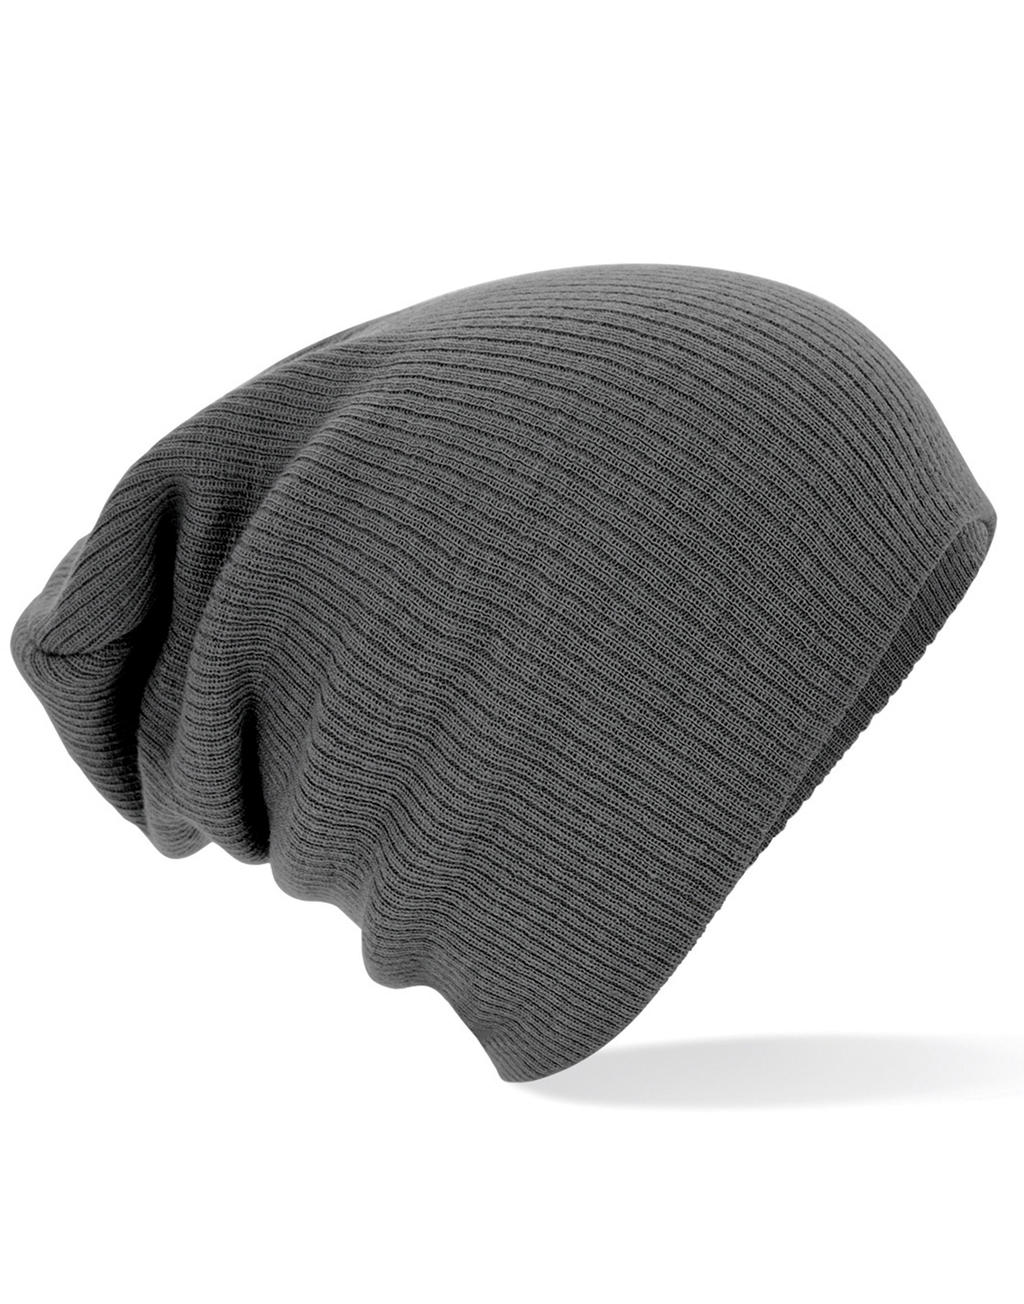  Slouch Beanie in Farbe Black